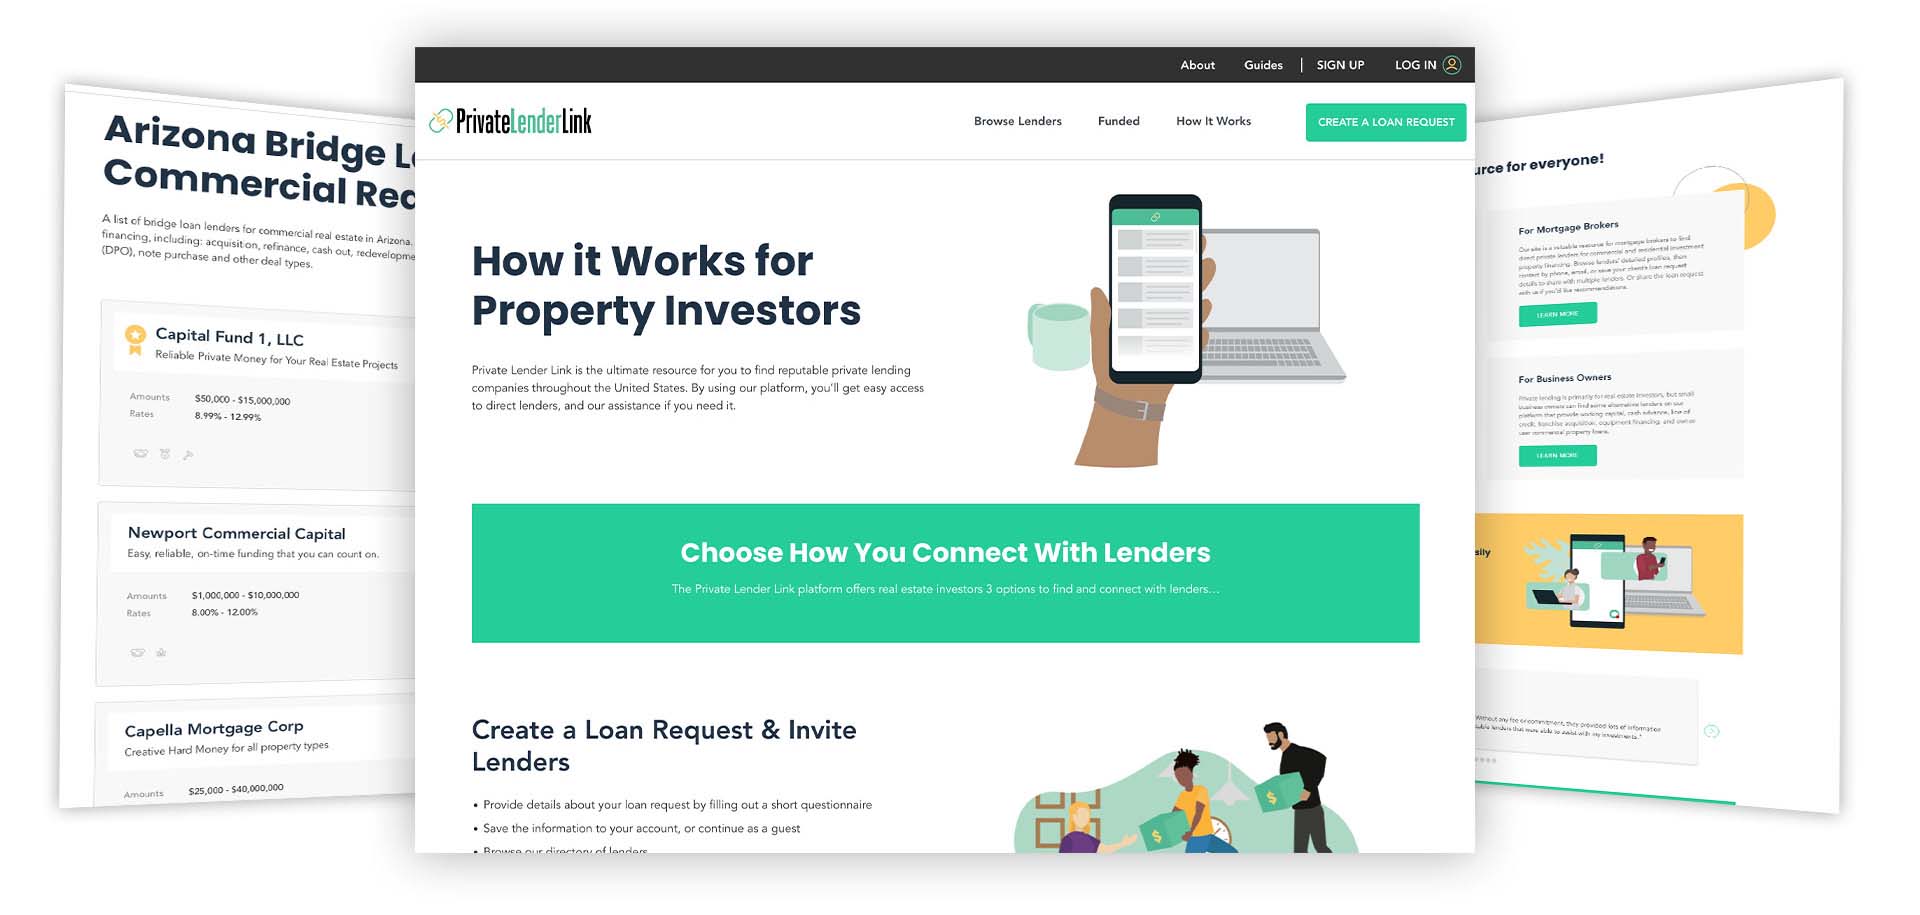 Triple screen display of Private Lender Link website showcasing services for real estate investors, with detailed sections on 'How it Works,' lender connection options, and targeted services for mortgage brokers and business owners, featuring a clean, user-friendly interface with illustrative graphics.